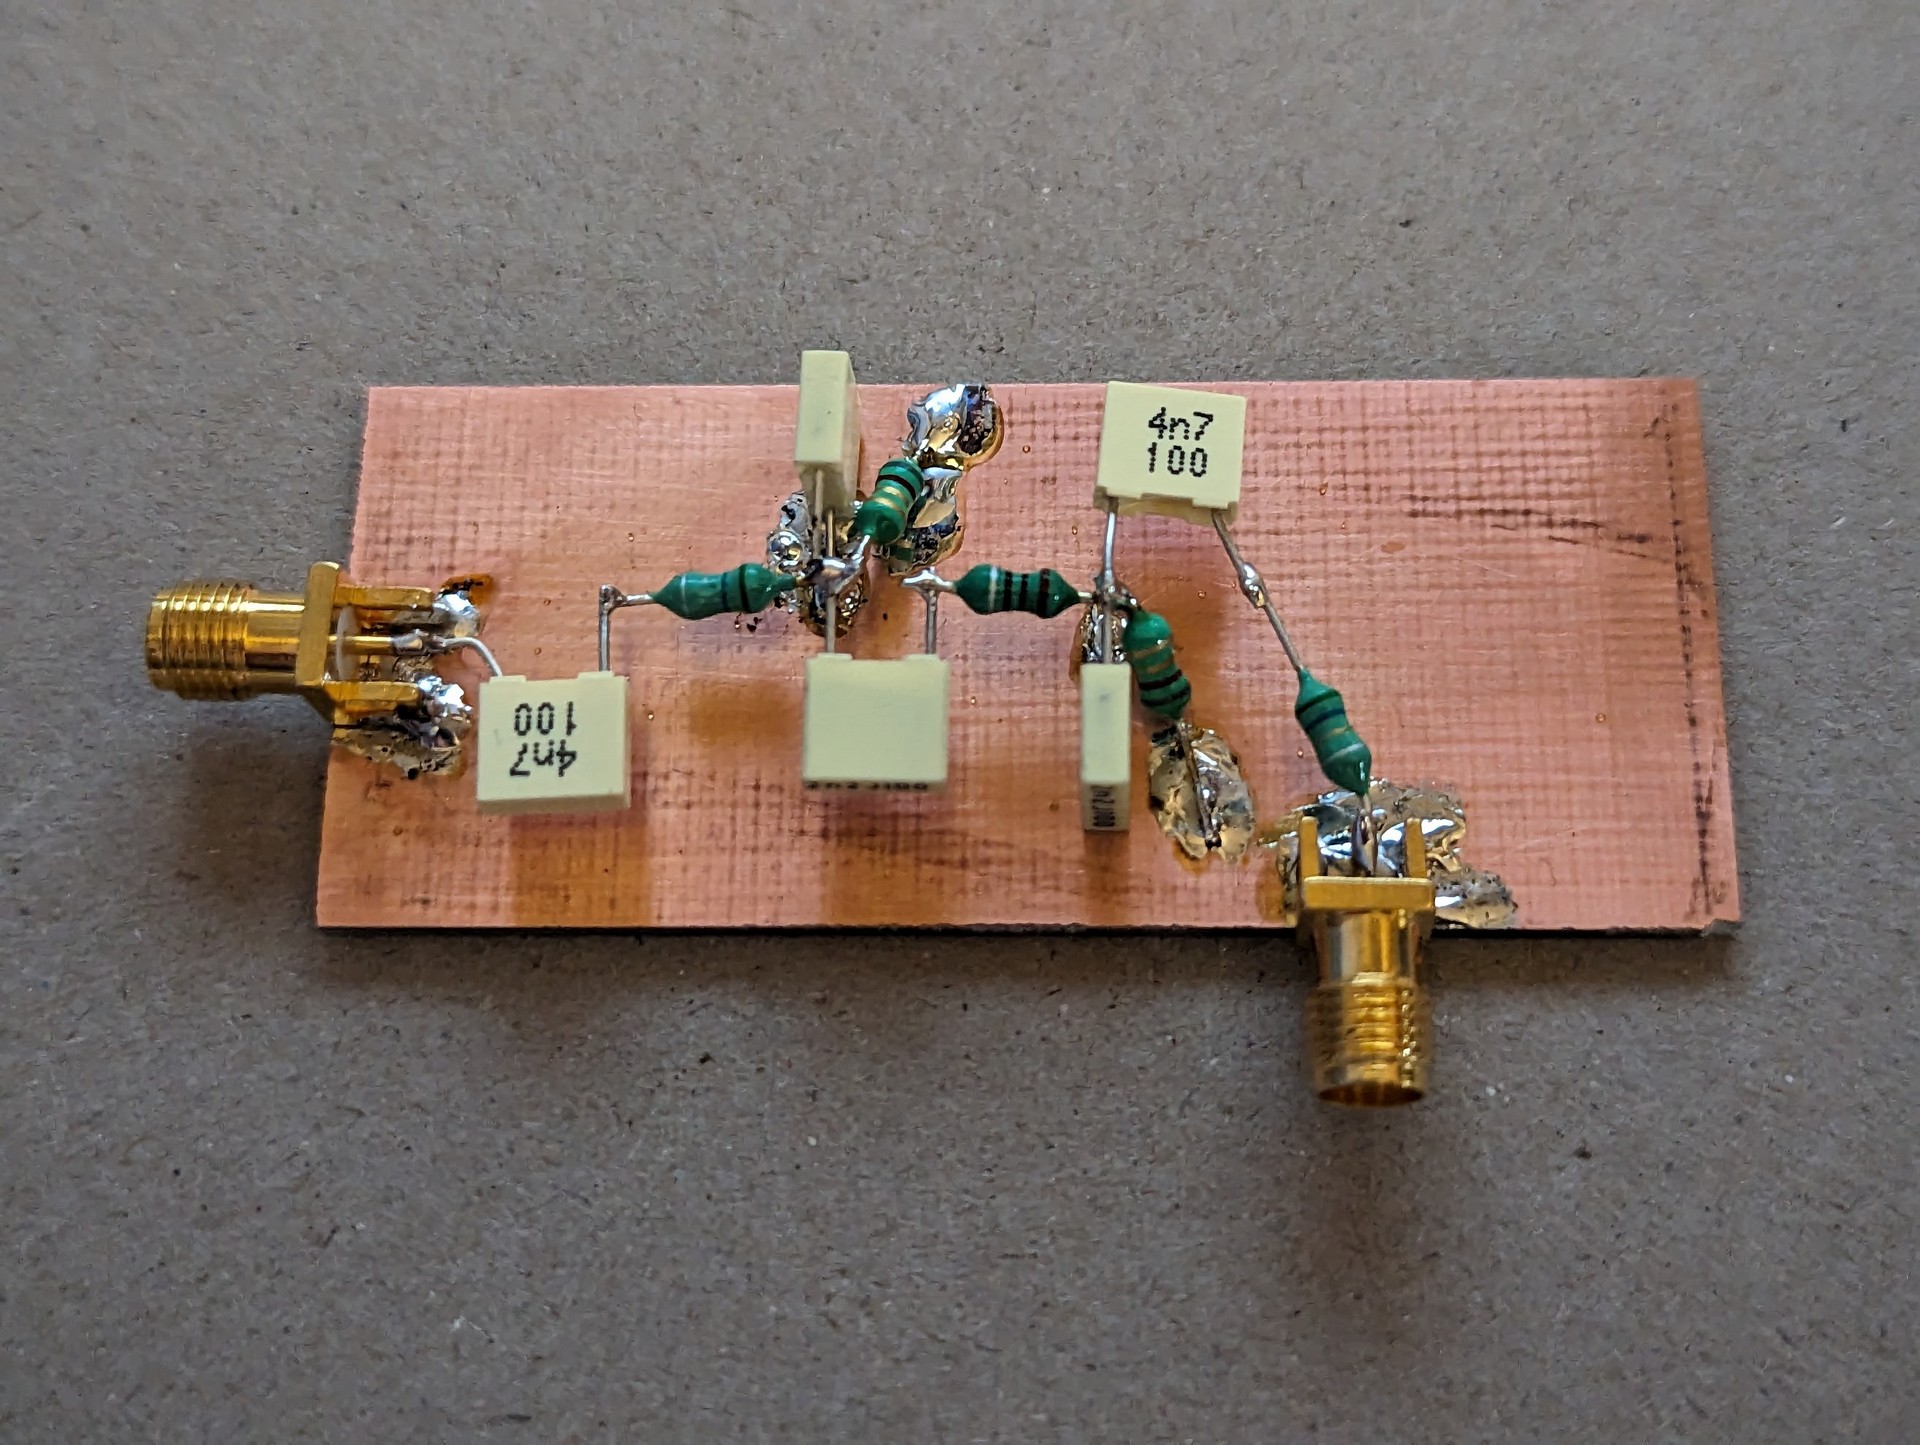 The filter constructed on some copper clad board. Input is to the left, output is on the bottom of the board